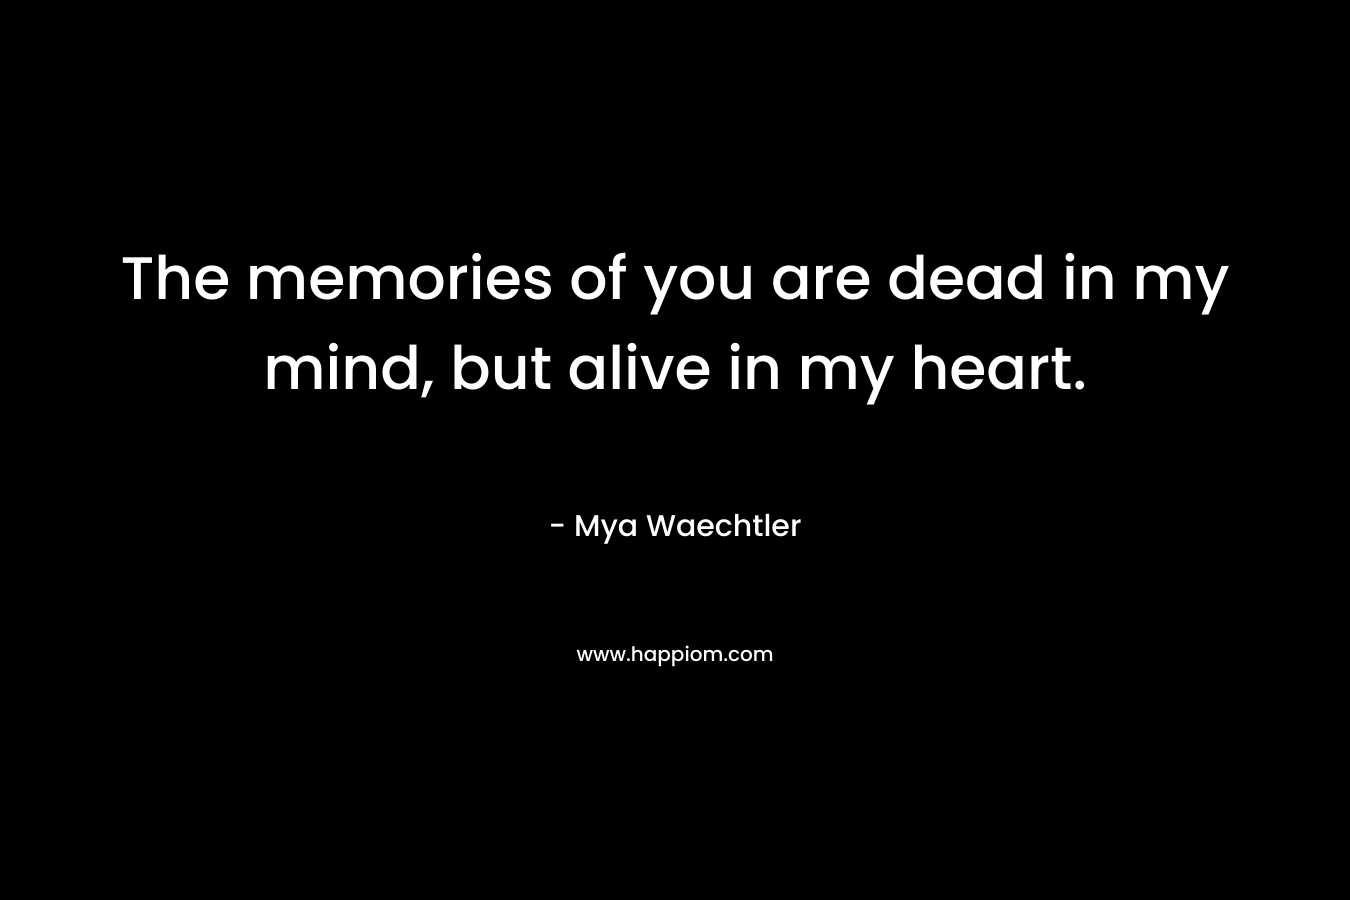 The memories of you are dead in my mind, but alive in my heart.